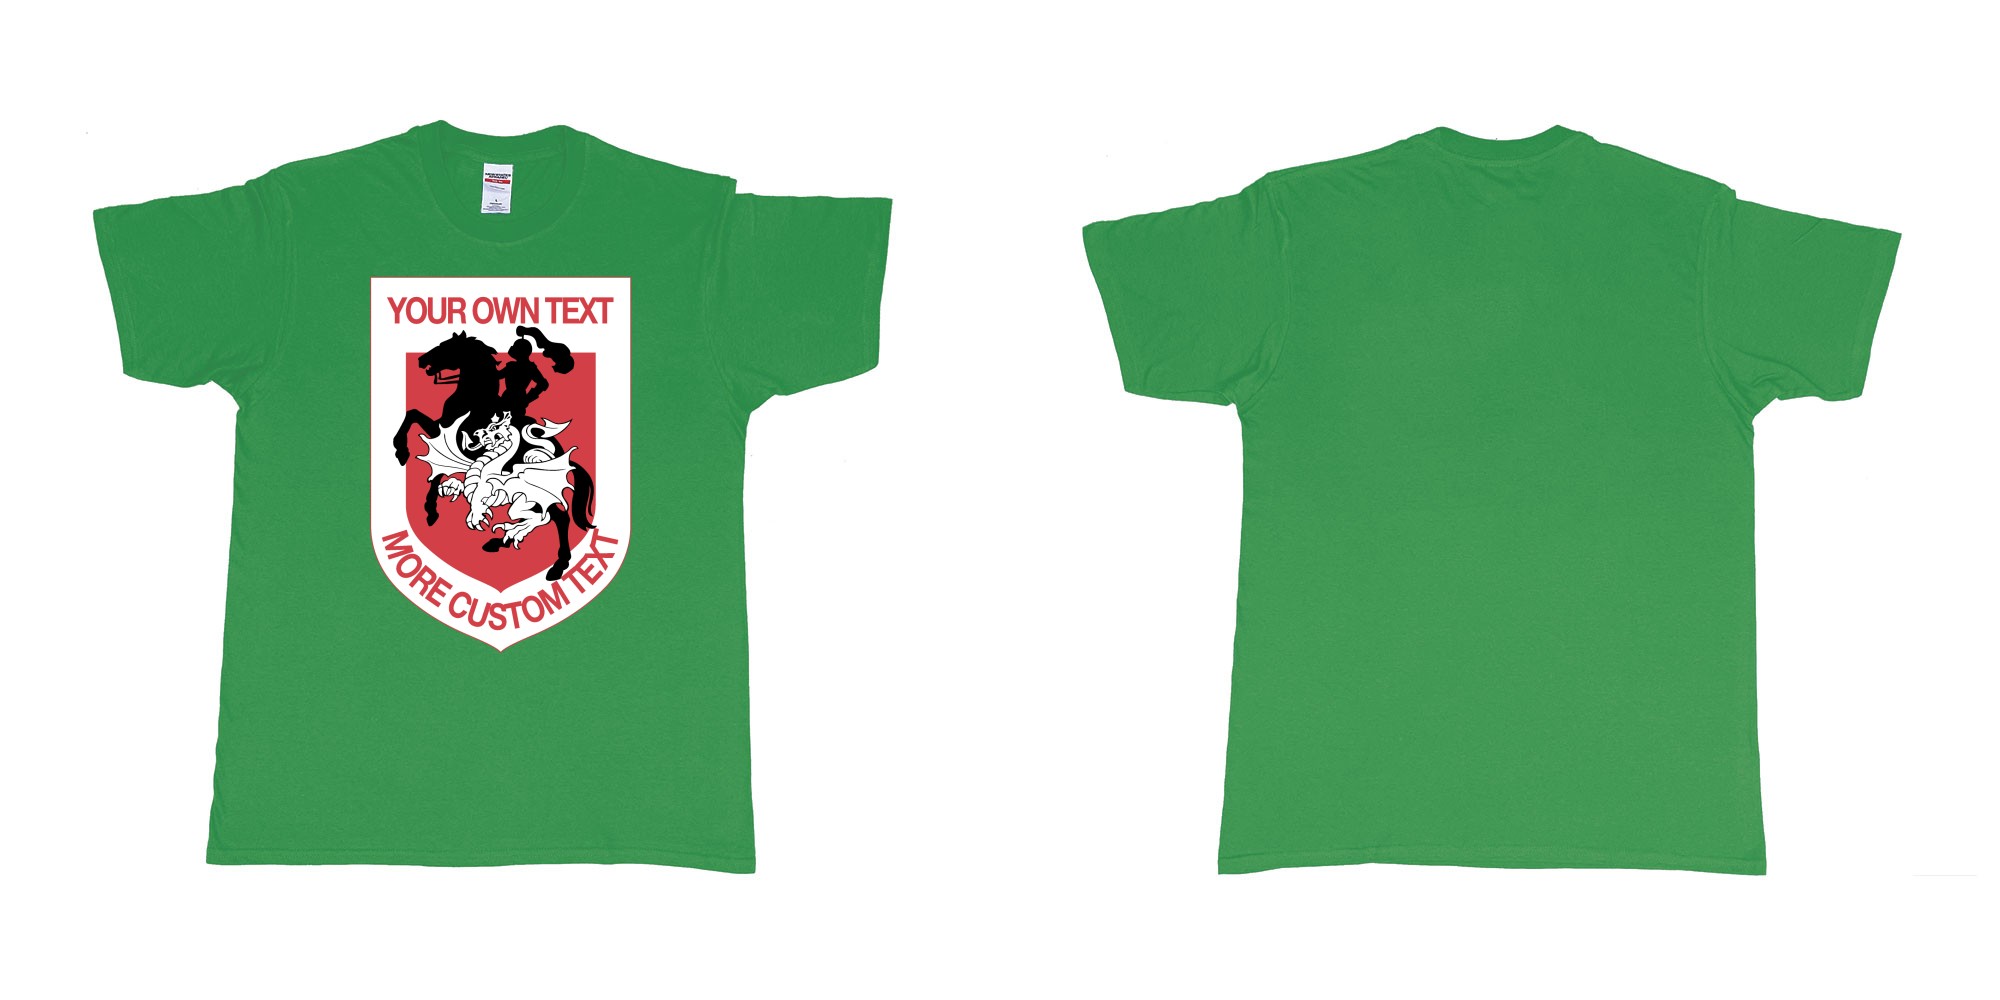 Custom tshirt design st george illawarra dragons custom design in fabric color irish-green choice your own text made in Bali by The Pirate Way